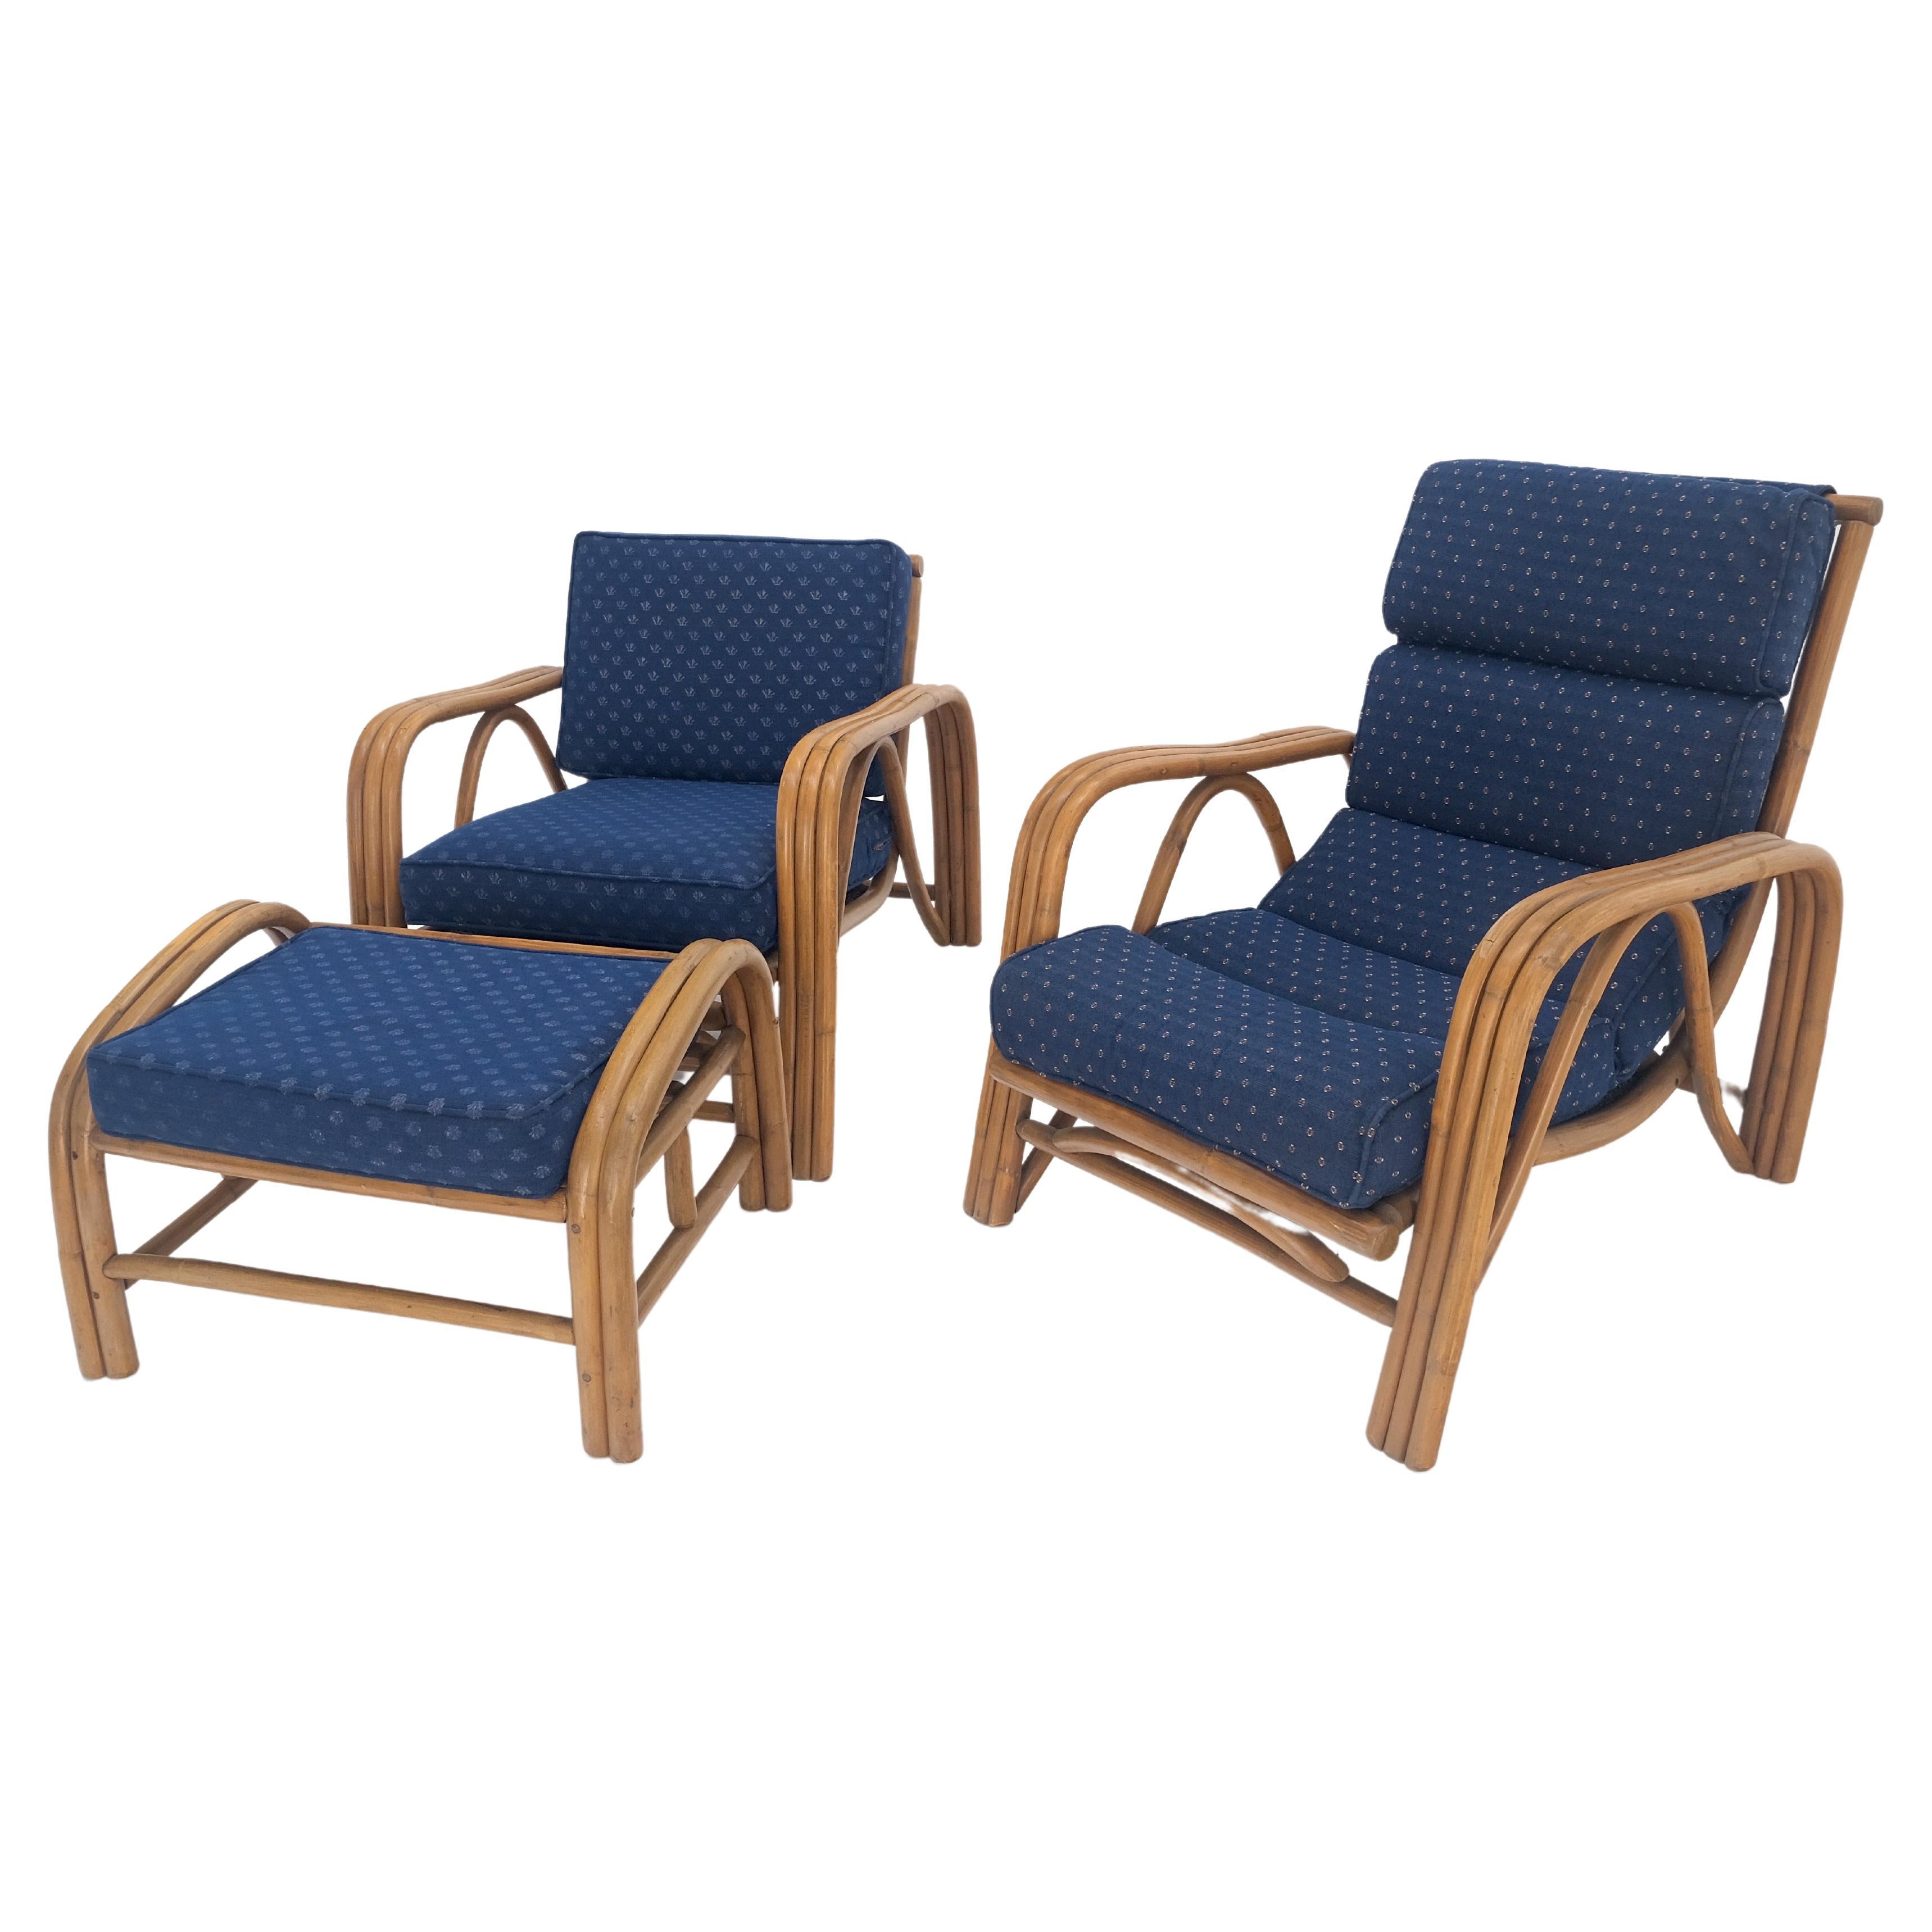 Pair of His & Hers Rattan Bamboo Mid Century Modern Lounge Chairs Ottoman MINT! im Angebot